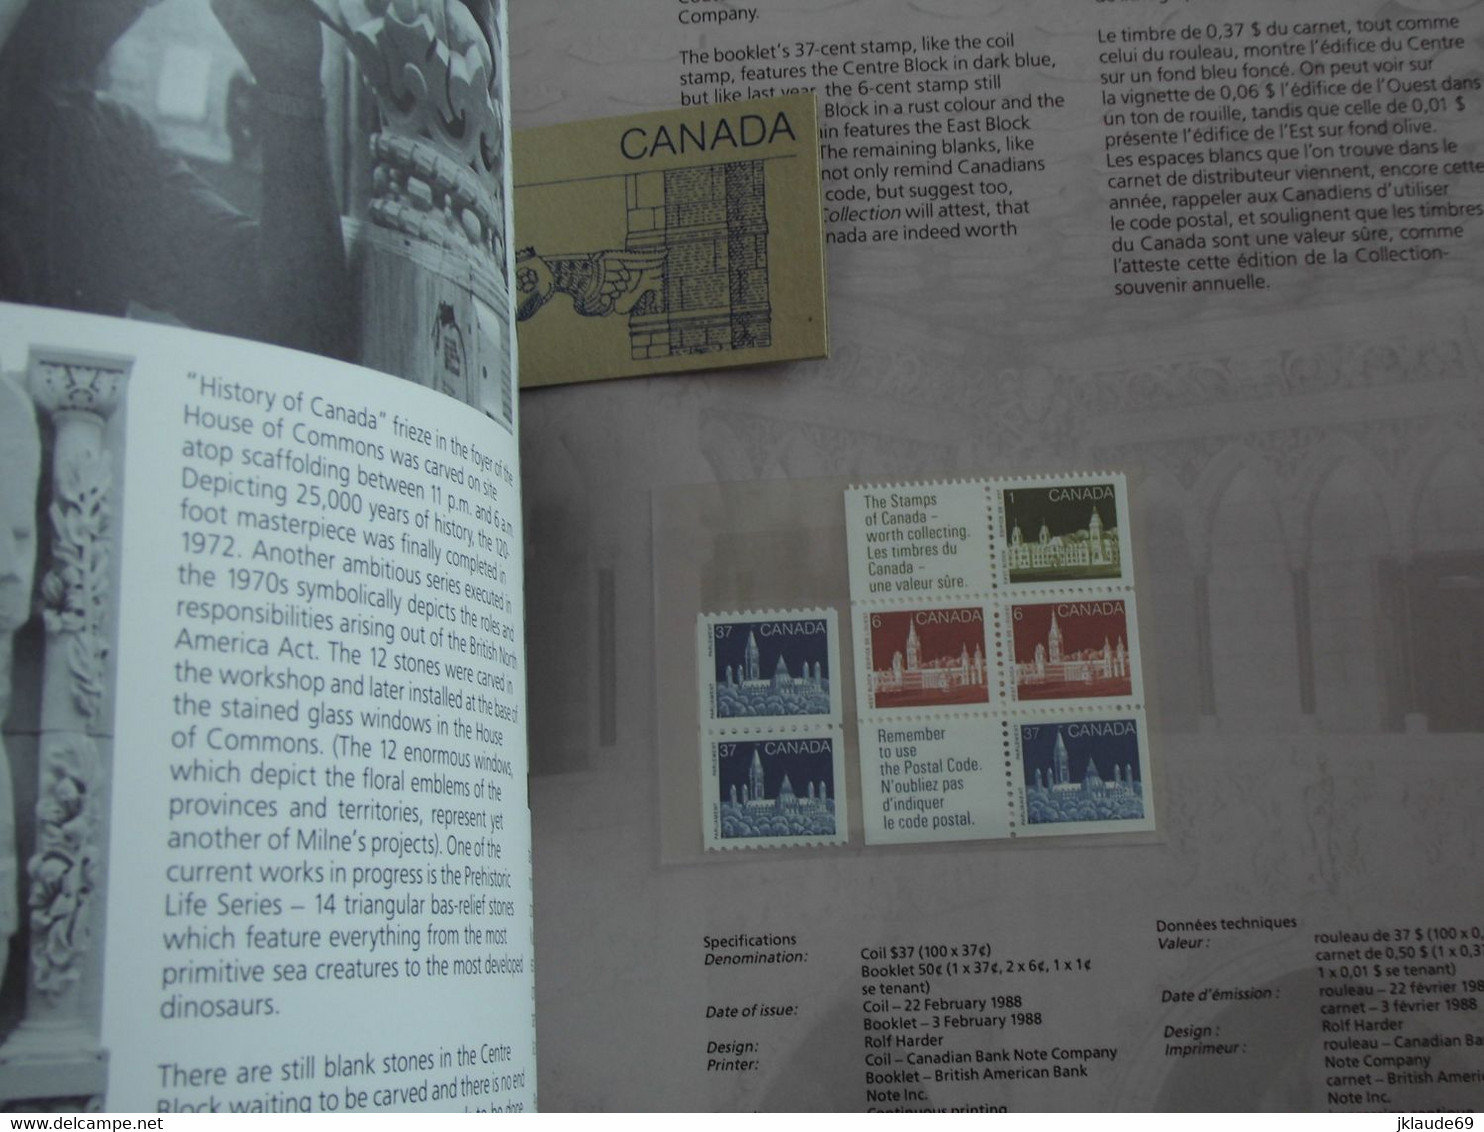 CANADA COLLECTION OF THE POSTAGE STAMPS OF CANADA 1988 LIVRE DE L'ANNEE YEAR BOOK  Complet Avec Timbres Neufs MNH ** - Annate Complete